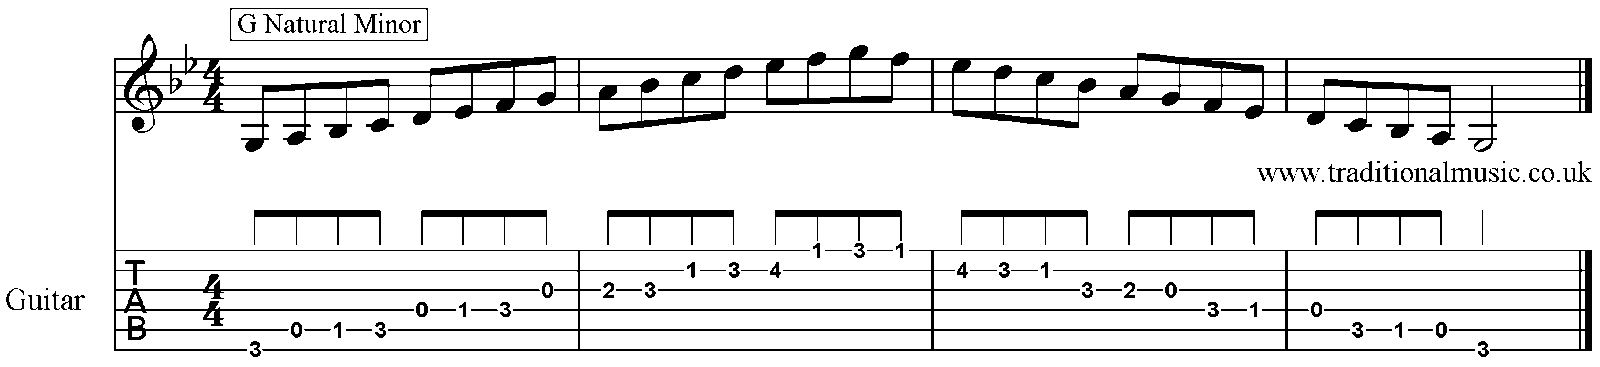 Minor Scales for Guitar A